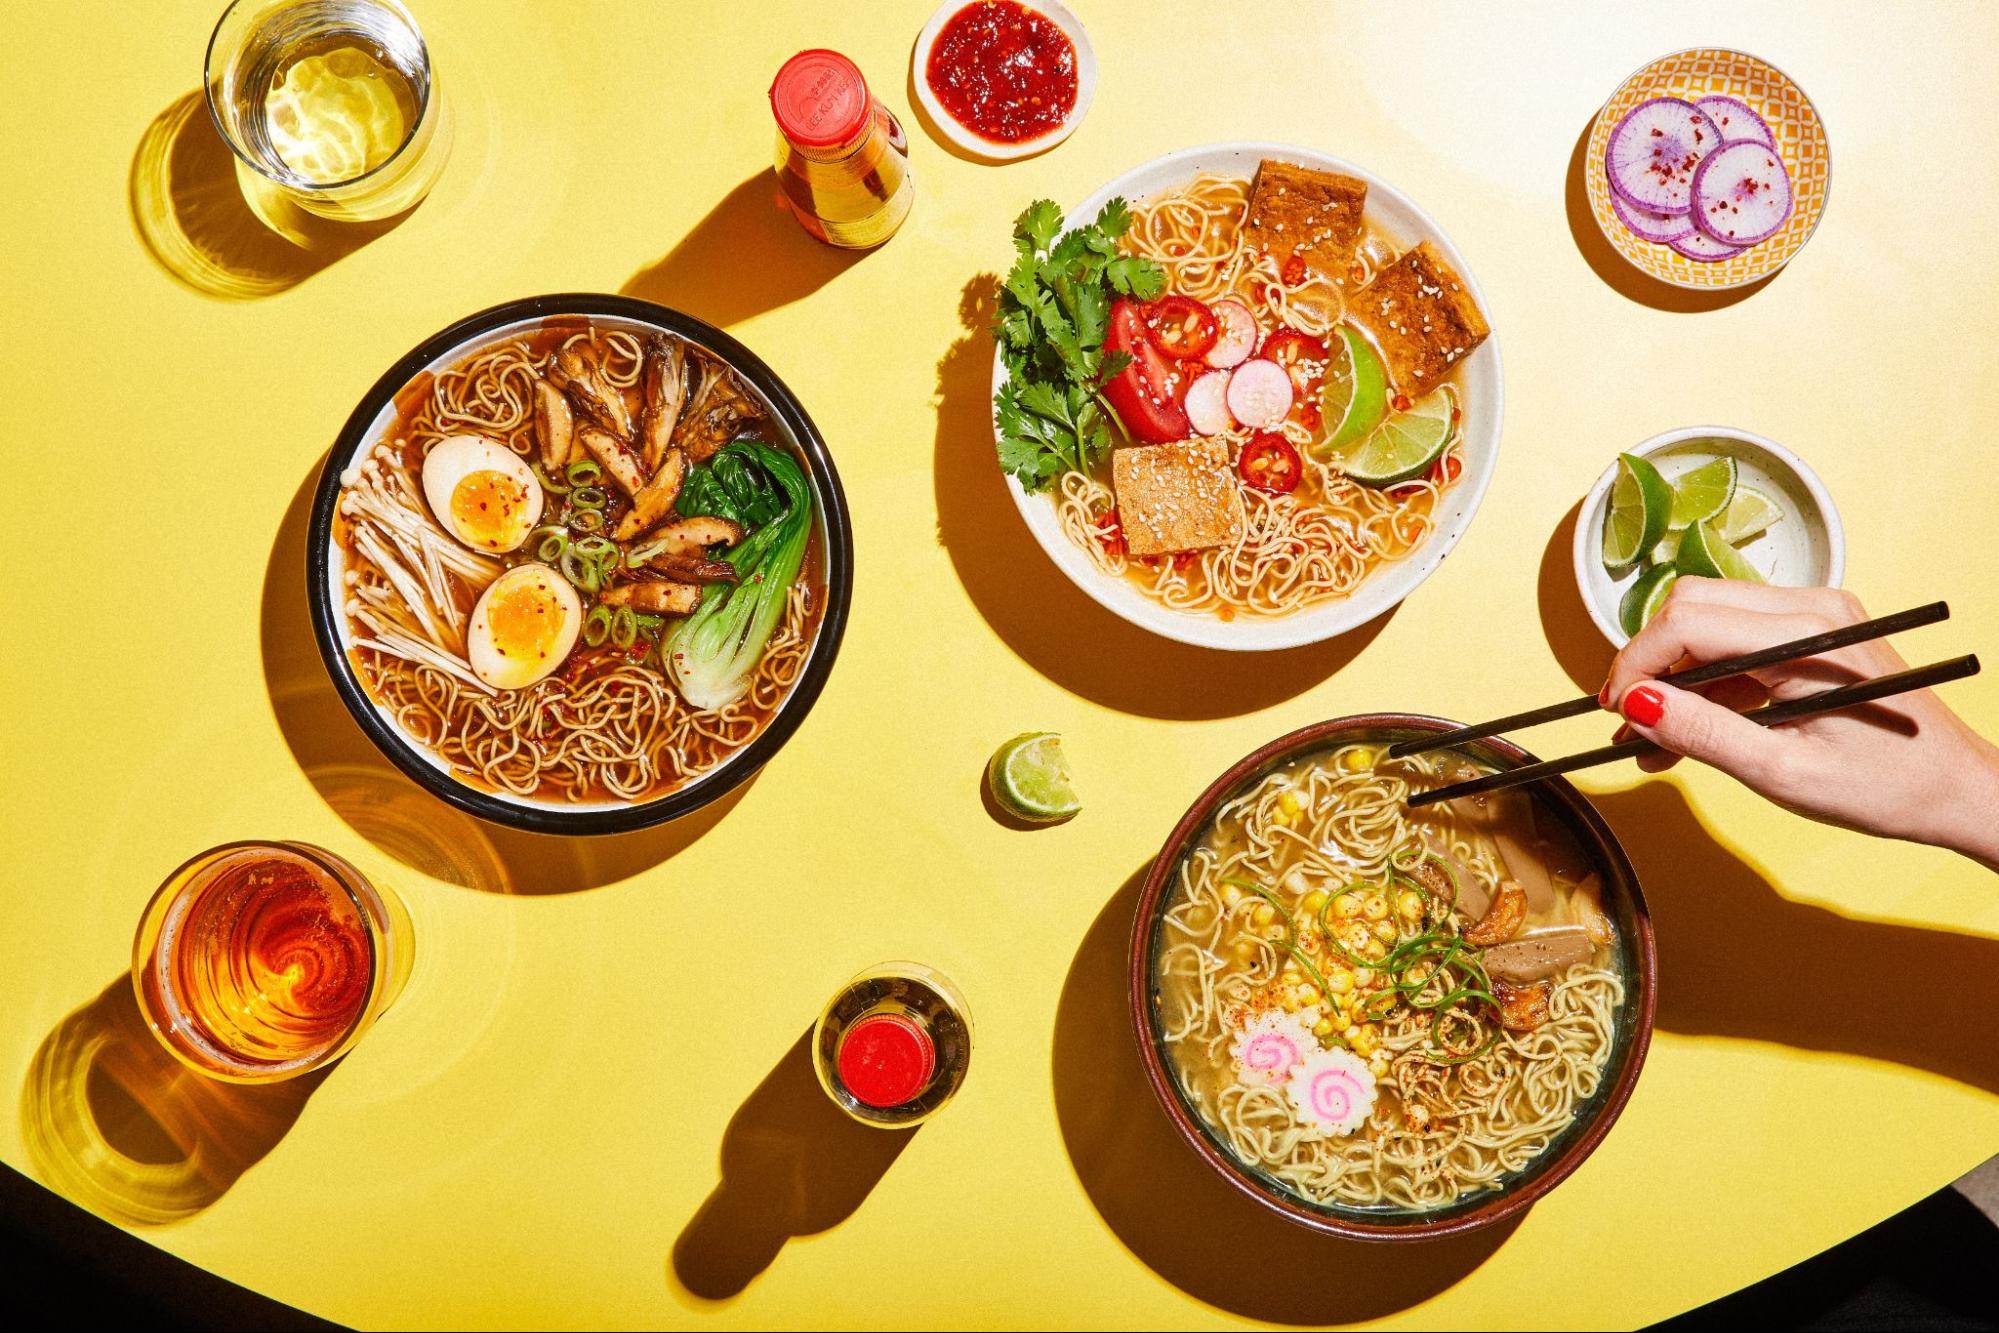 Three different bows of ramen on a yellow table with a hand holding chopsticks in the frame.